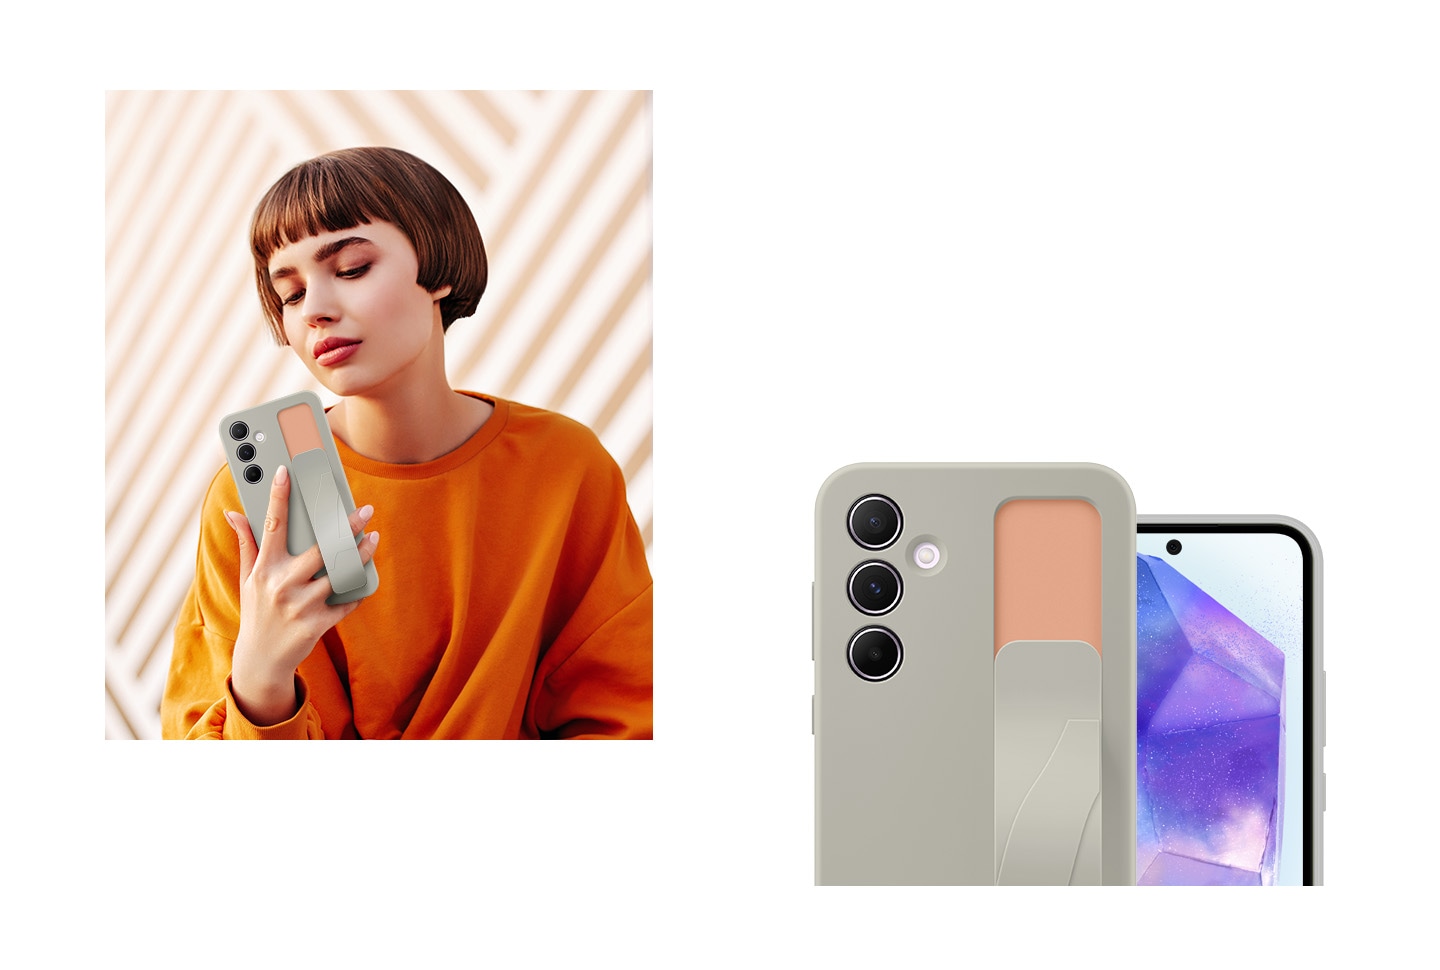 A woman wearing an orange sweater is taking a selfie with a Galaxy device wearing a Gray Standing Grip Case. To the right, two Galaxy devices wearing Gray Standing Grip Cases are shown, one showing the backside and the other partially showing the screen.